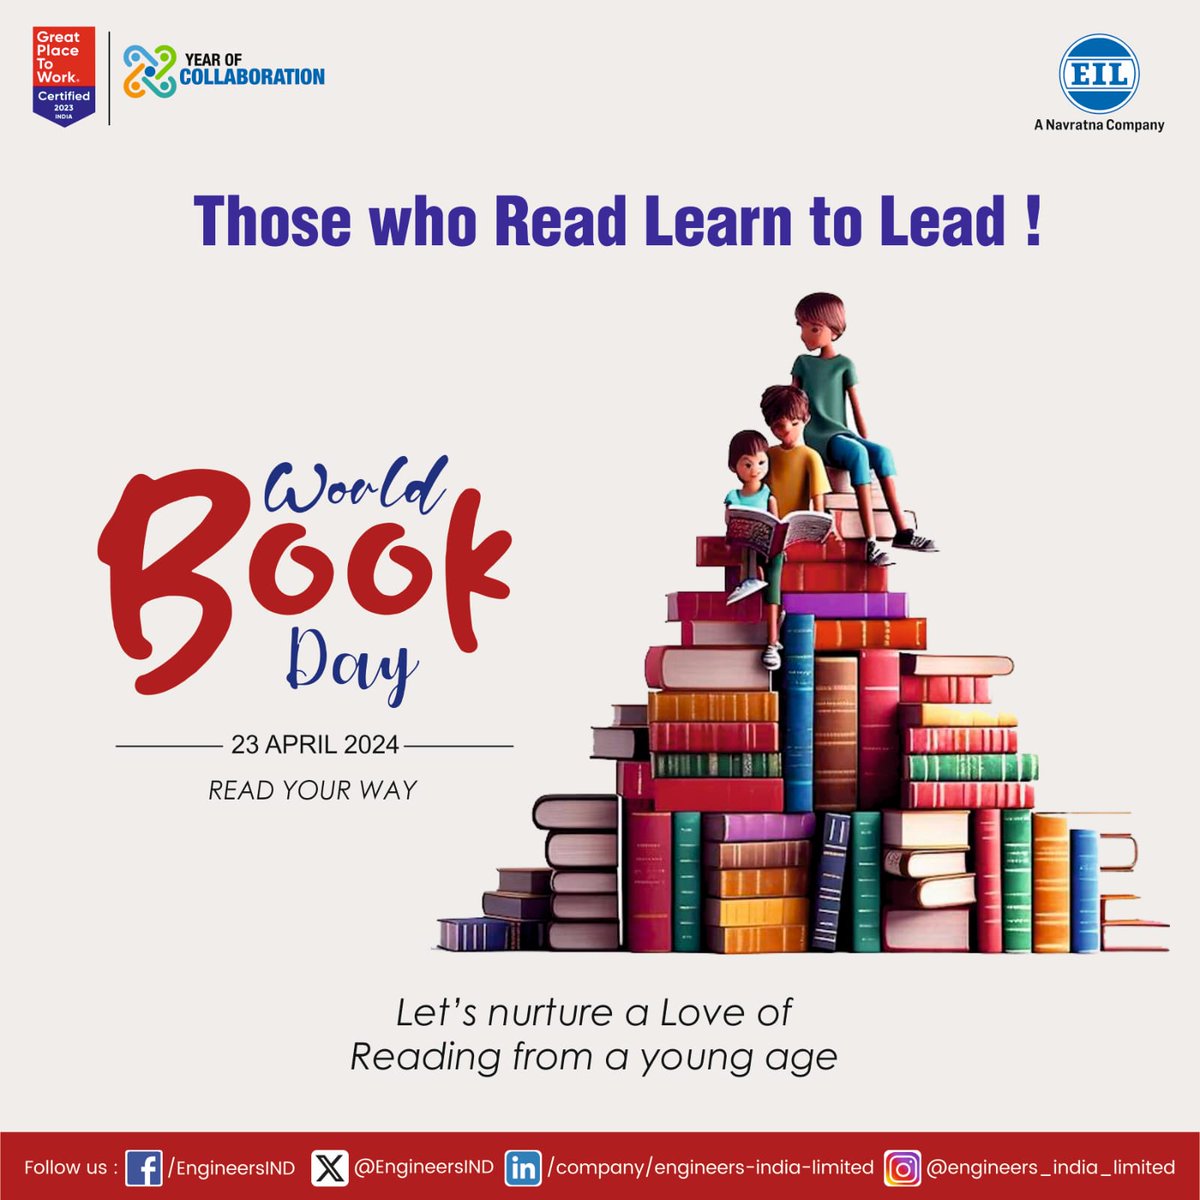 Team EIL wishes a happy #WorldBookDay to all our valuable stakeholders and collaborators. Let us celebrate the joy of reading and pledge to encourage the culture of reading books to inculcate a scientific temper and the 'spirit of inquiry' for an empowered society. @HardeepSPuri